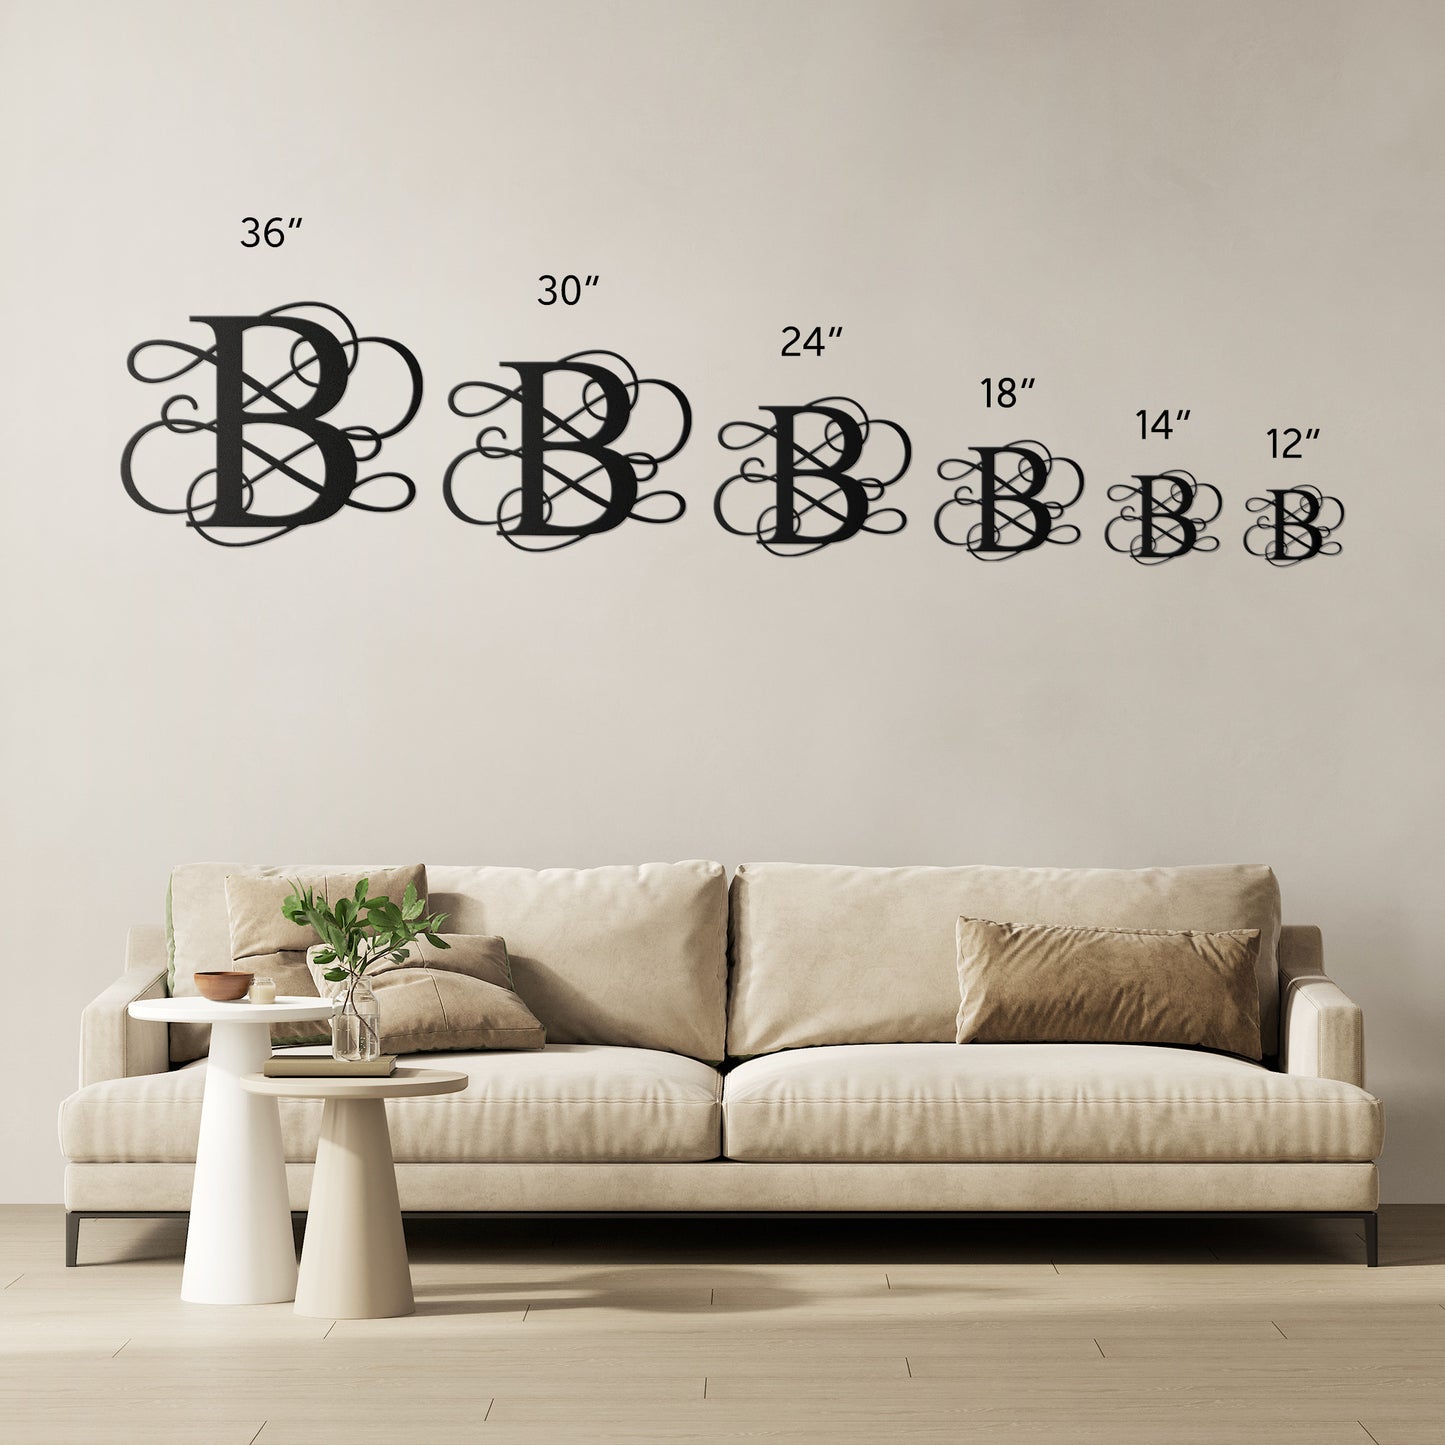 Letter B, Your Initial, Swirl Letters, Monogram, Metal Signs, Rustic Sign, Wall Art, Wall Decor